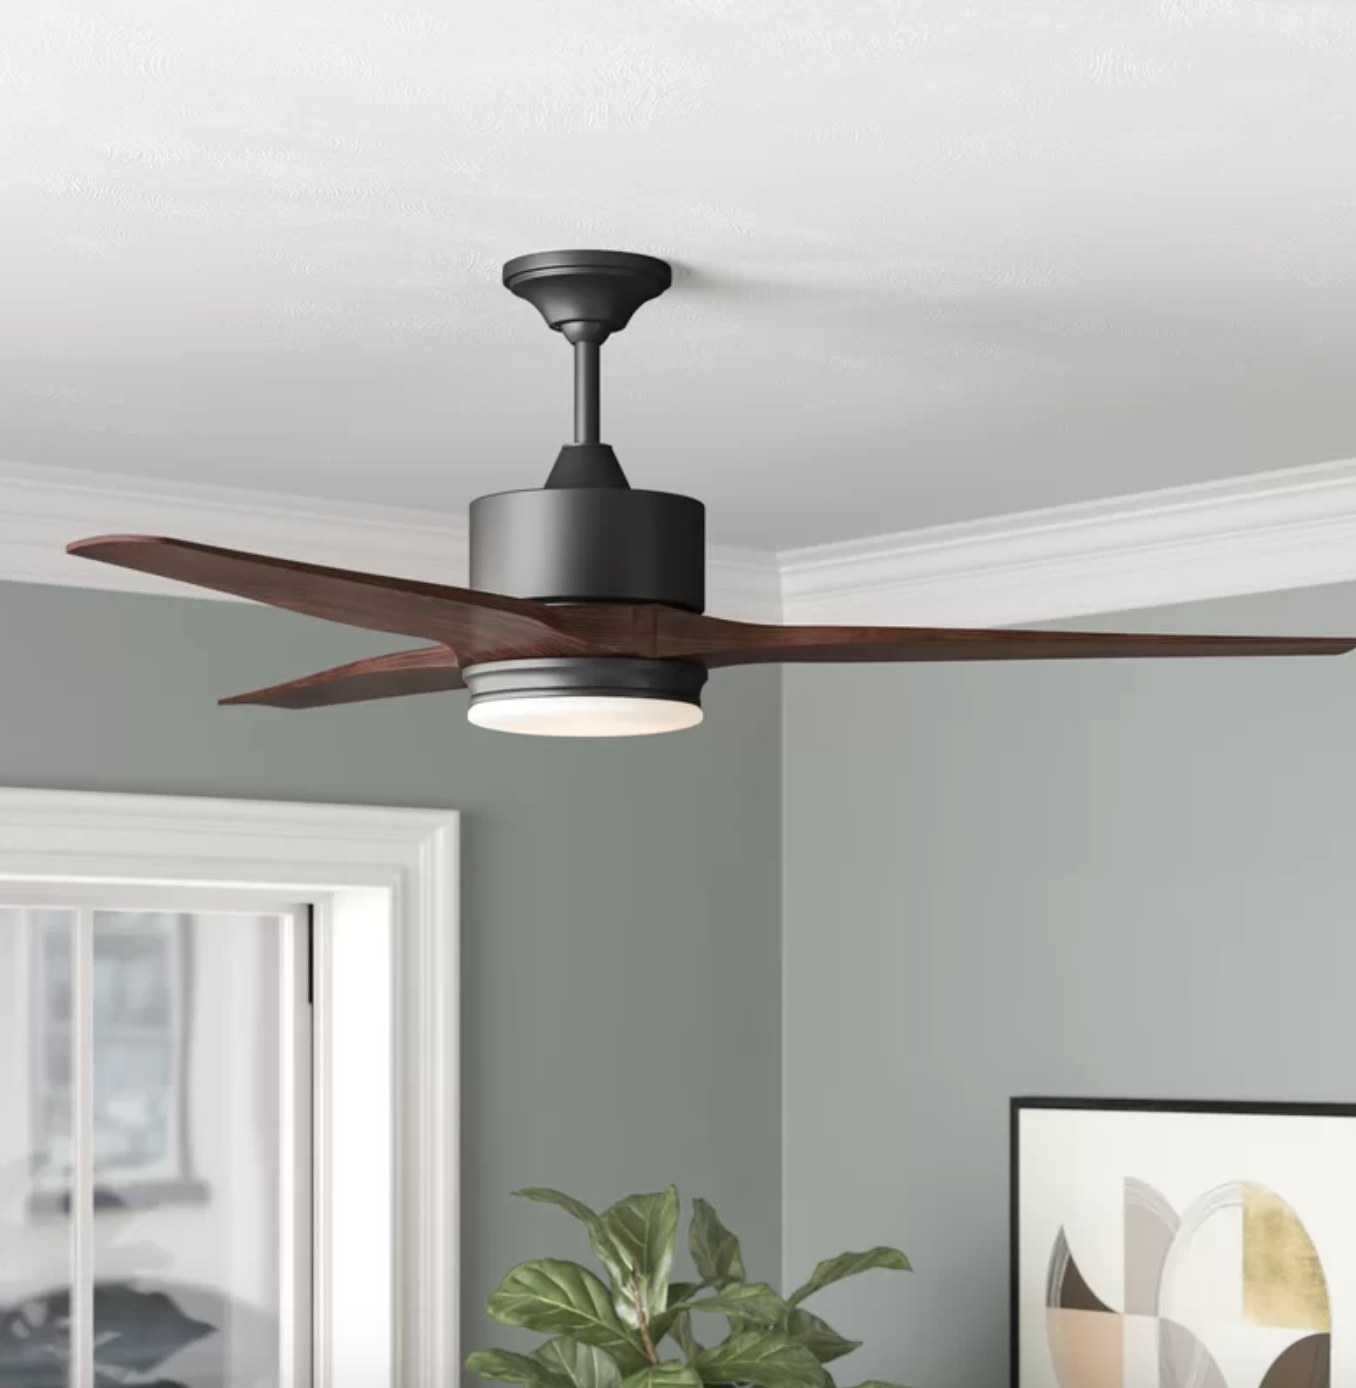 The fan has a black base, dark brown wooden blades and a white LED light